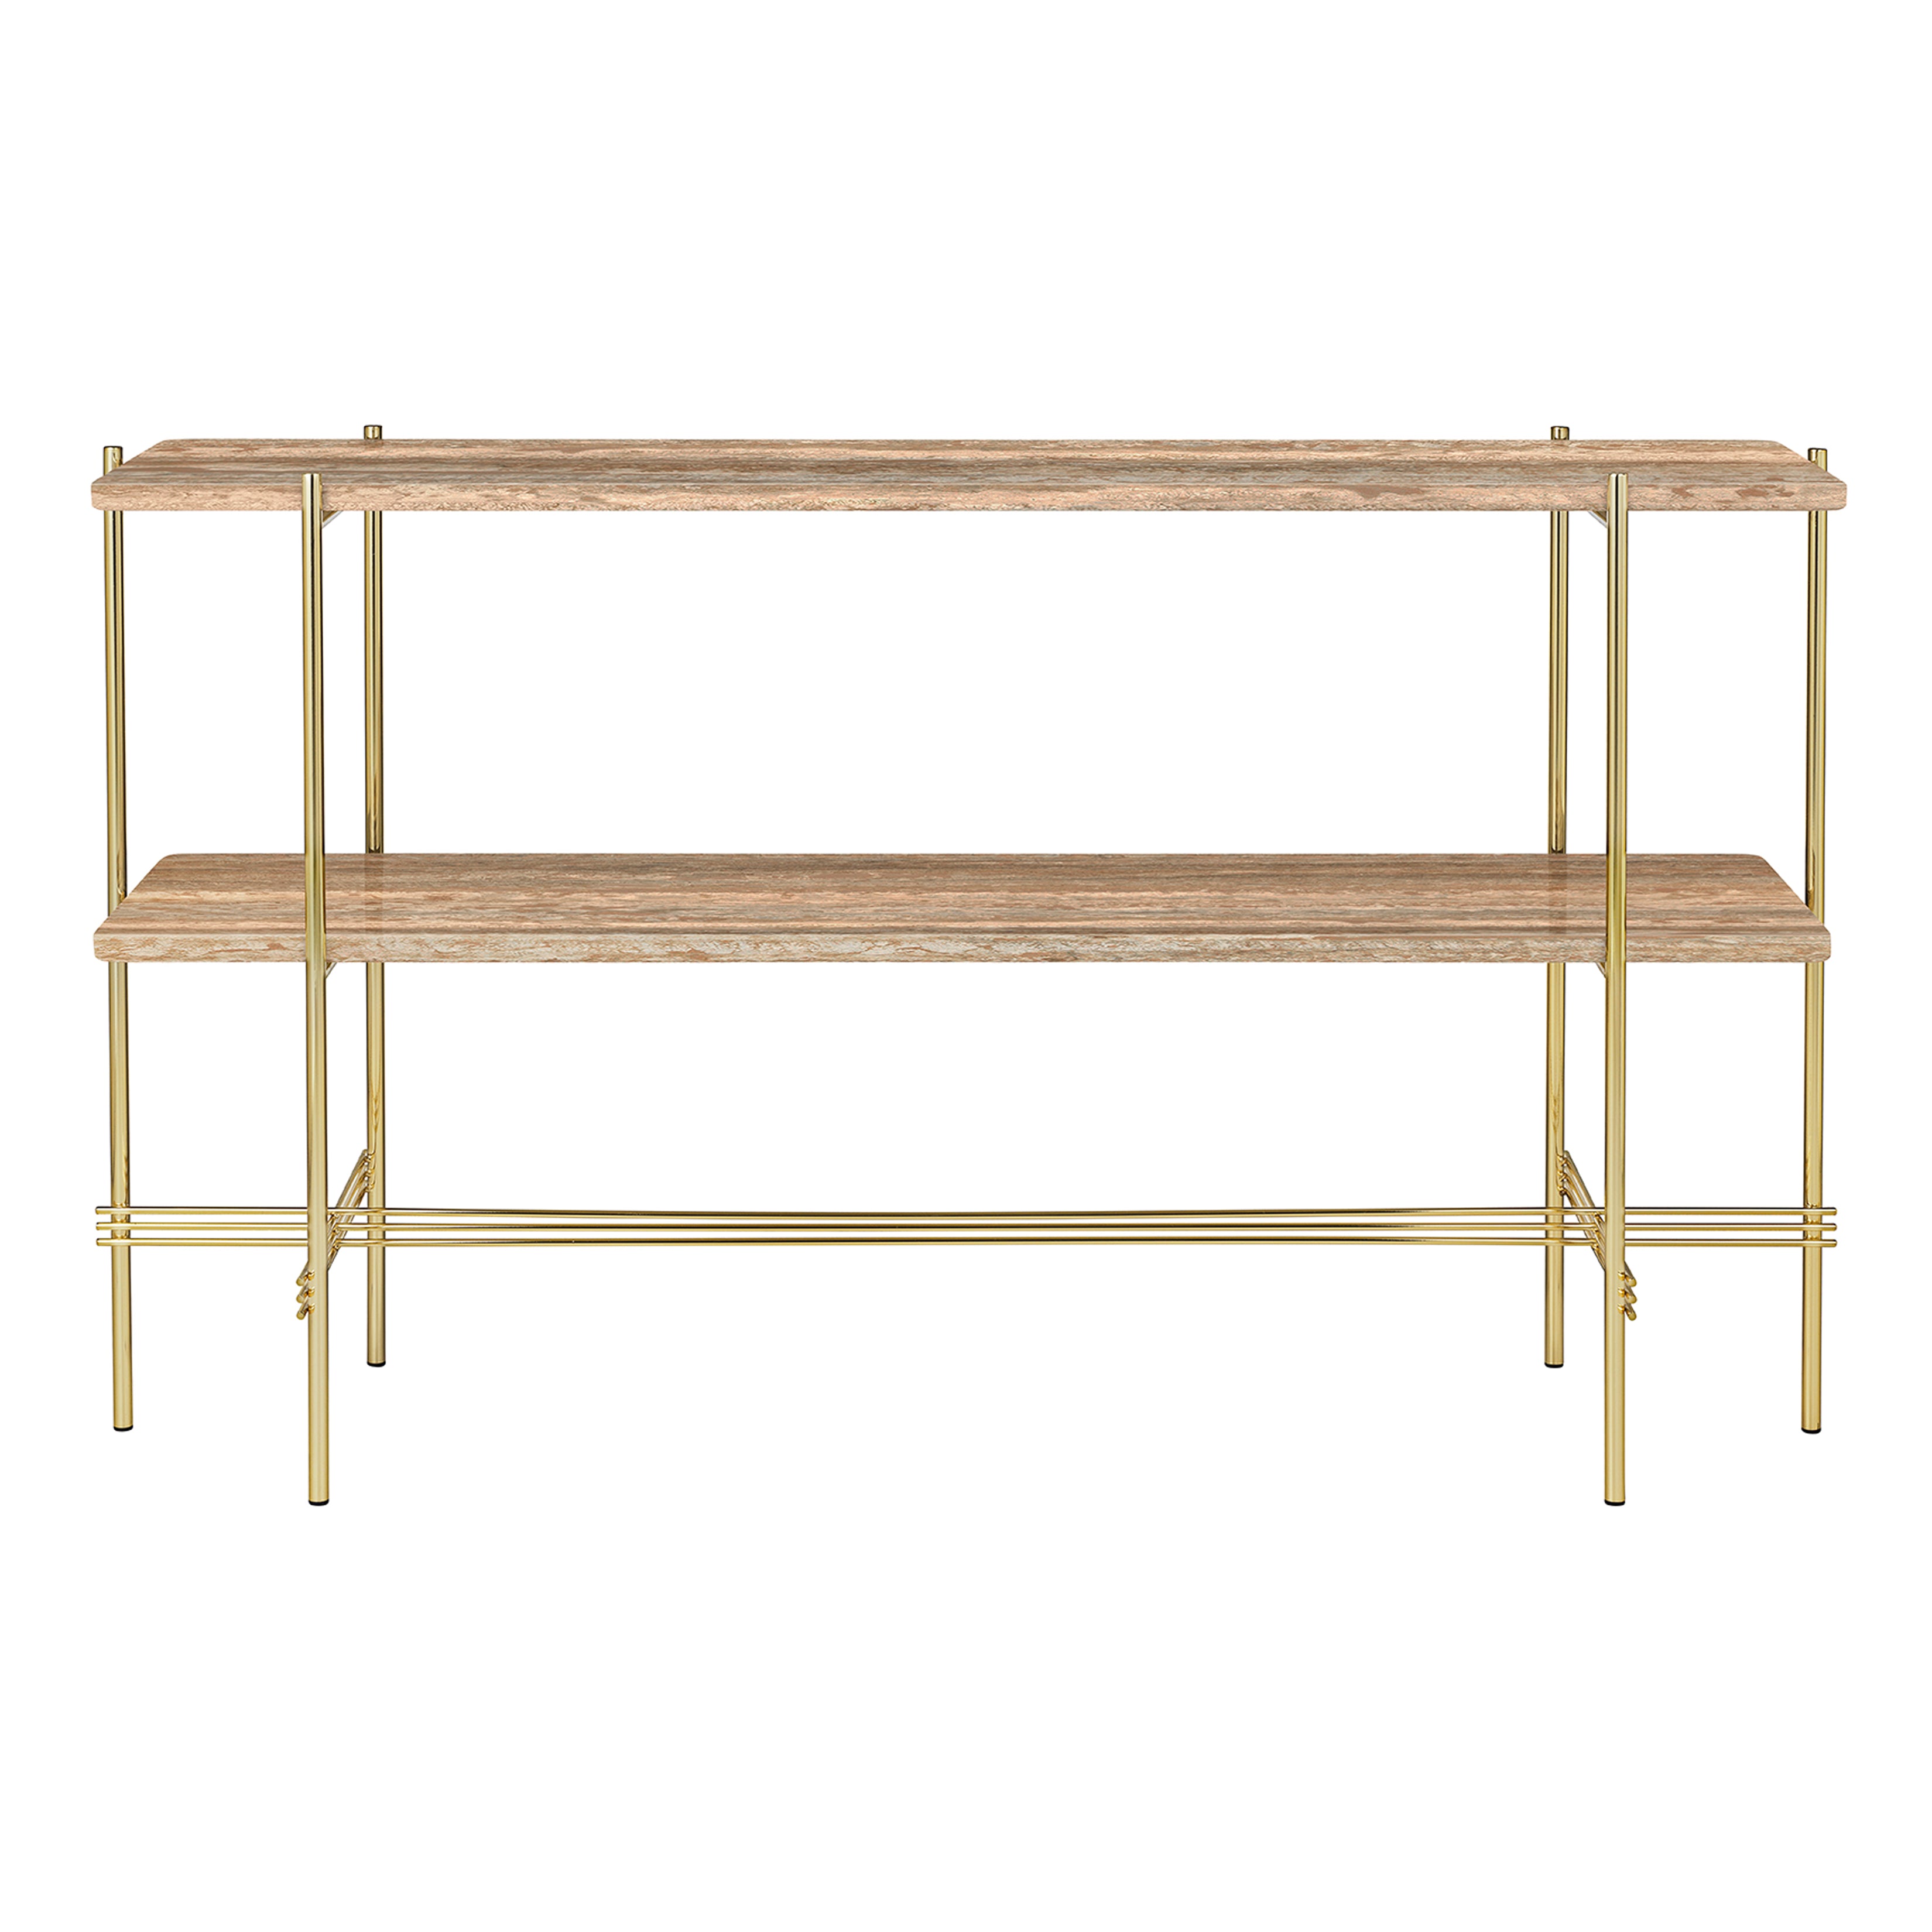 TS Console: Without Tray + Brass + Warm Taupe Travertine